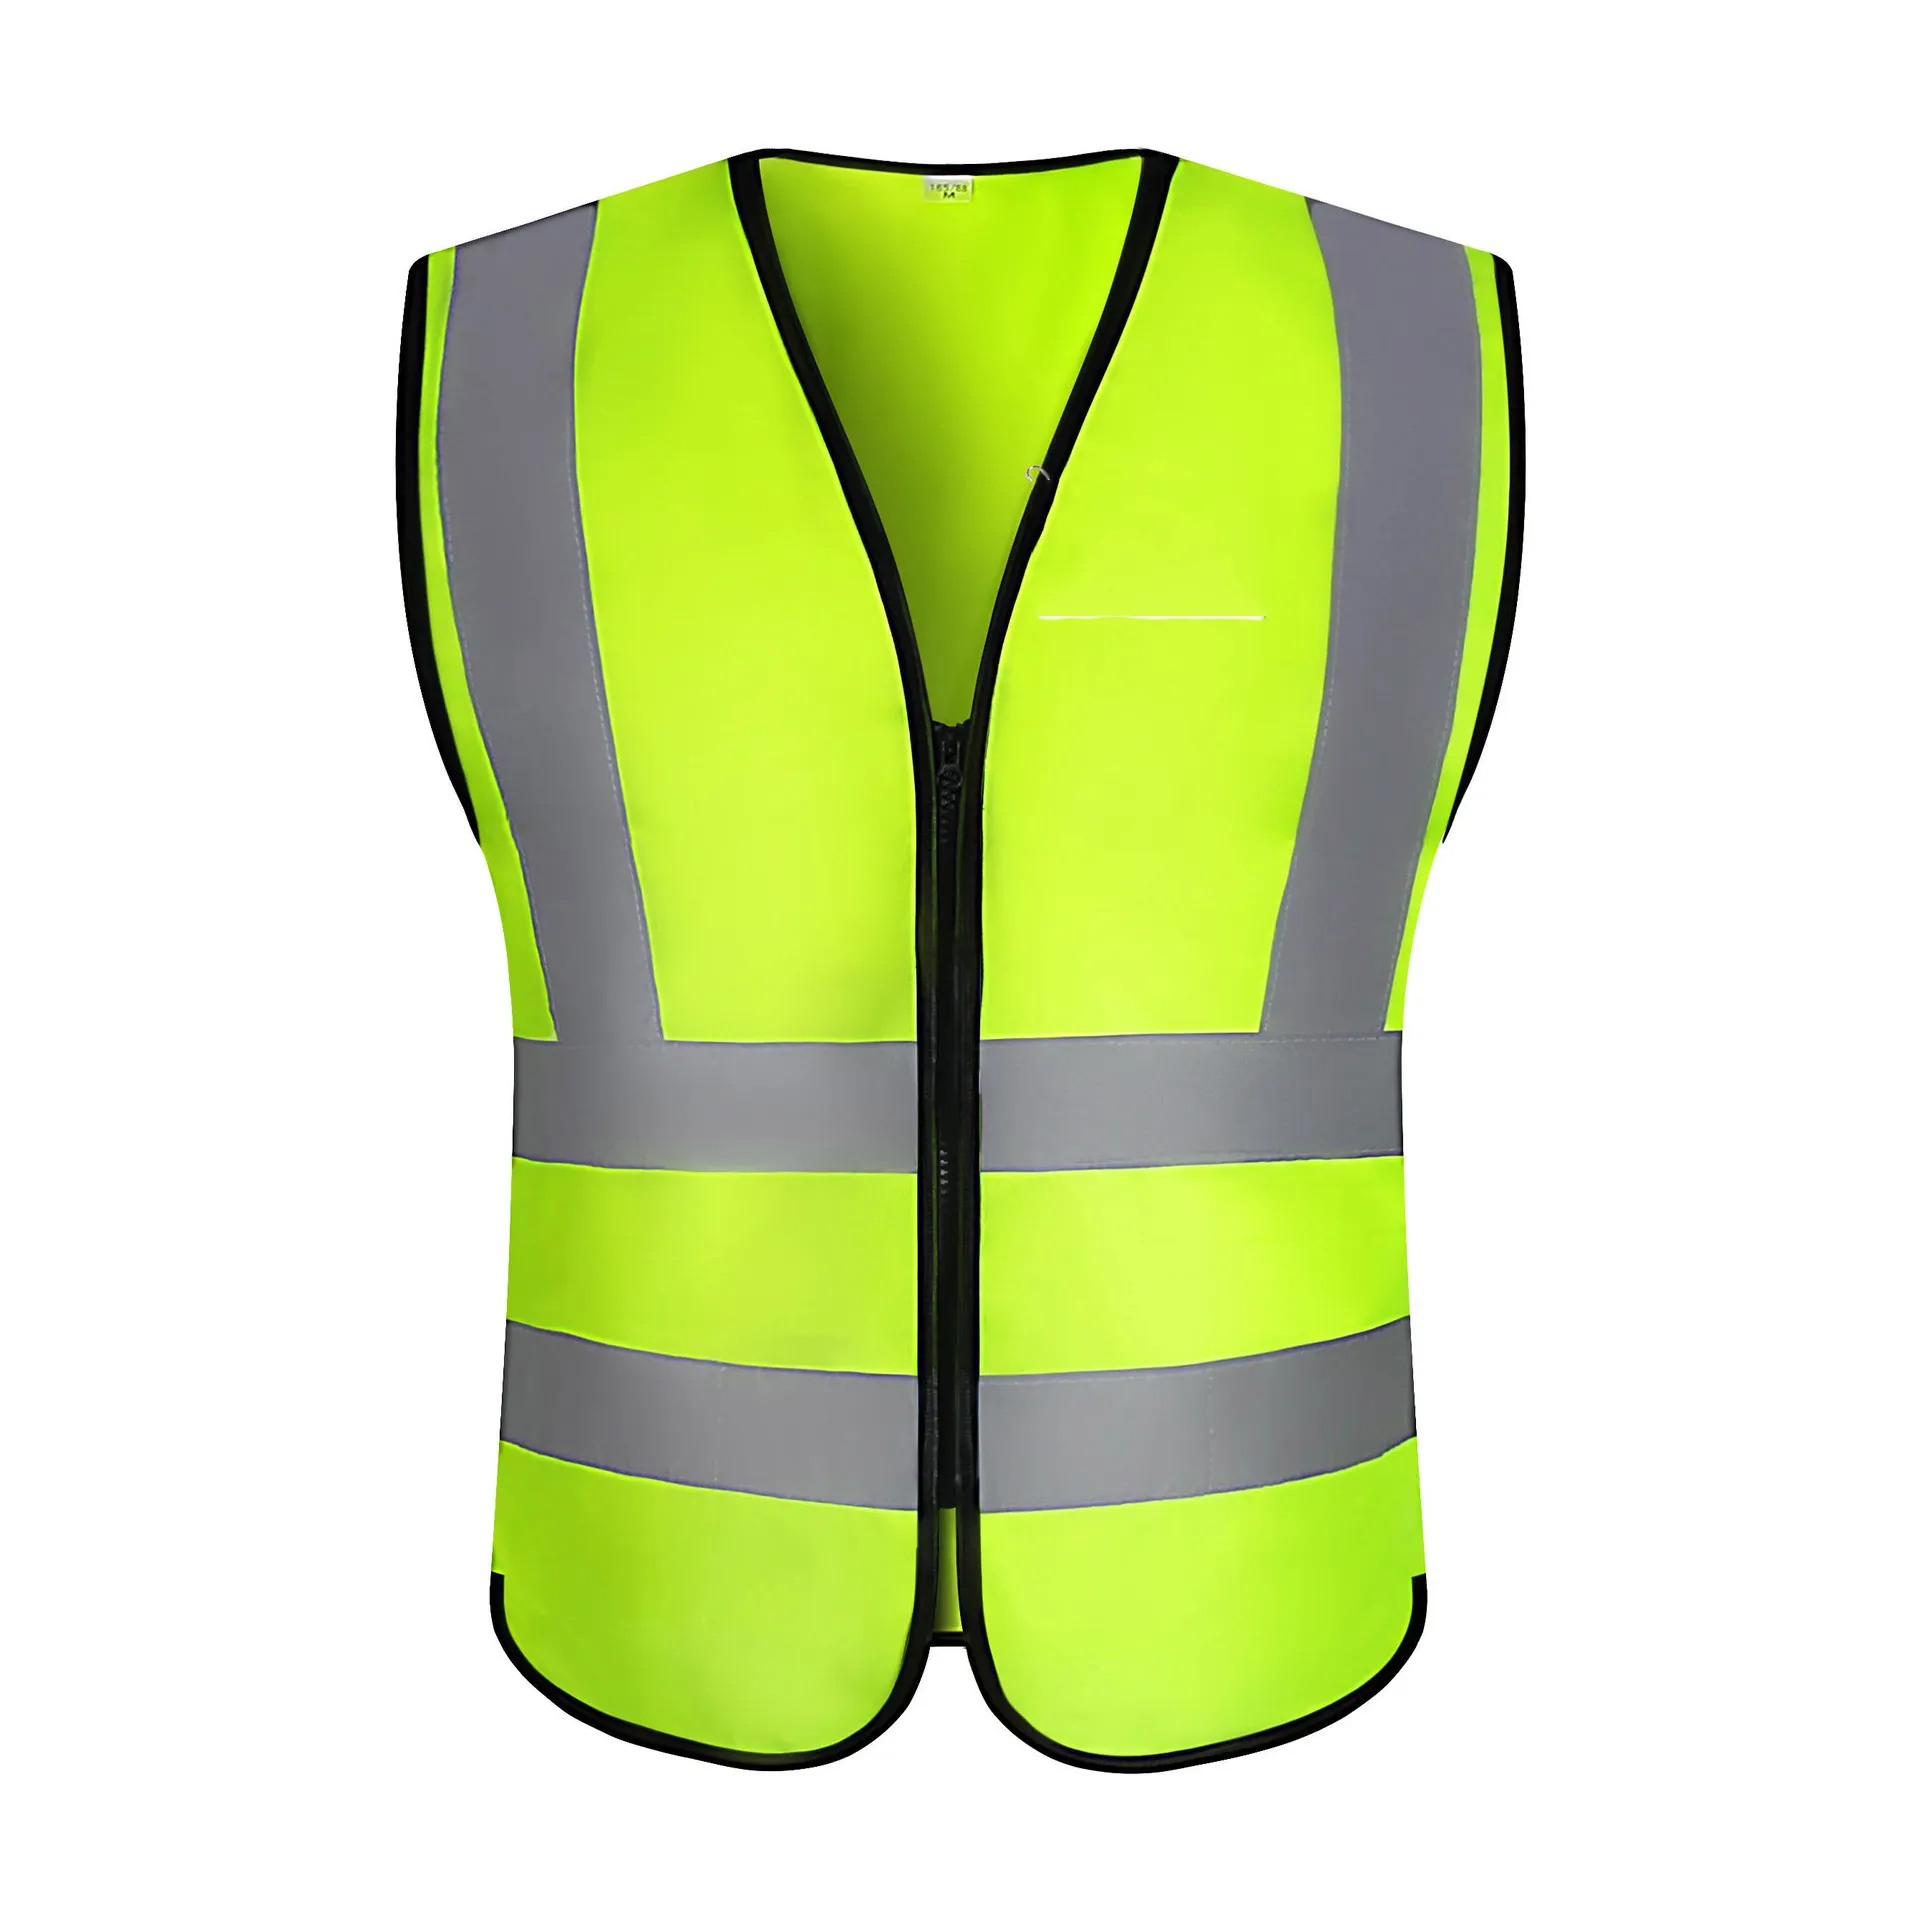 High Visibility Security Uniform Reflective Vest Safety Vest Roadway Safety Clothes road workers safety clothing